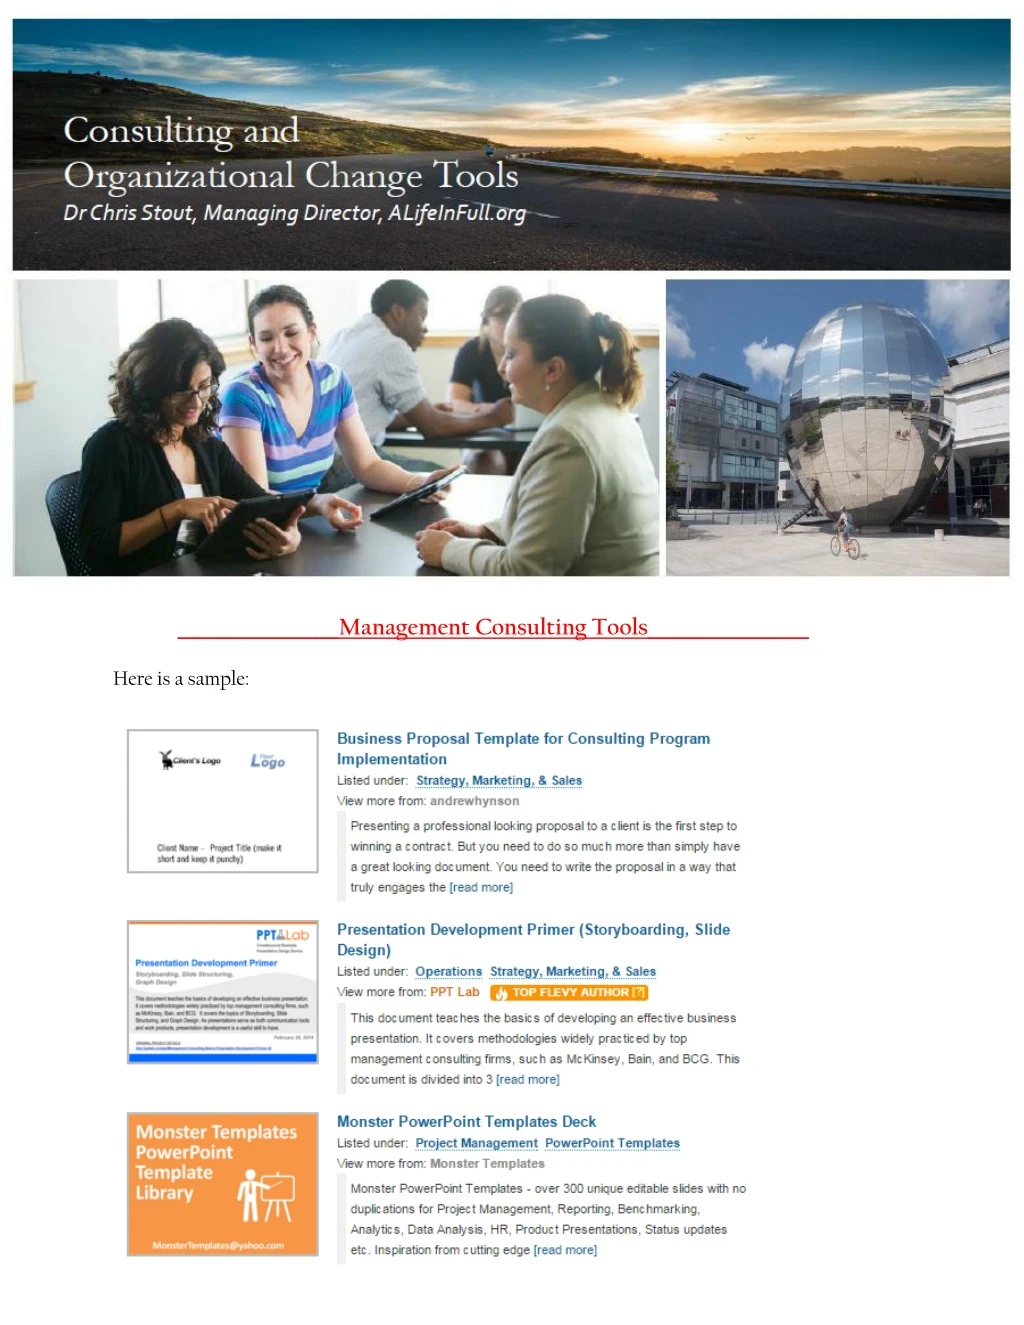 management consulting tools